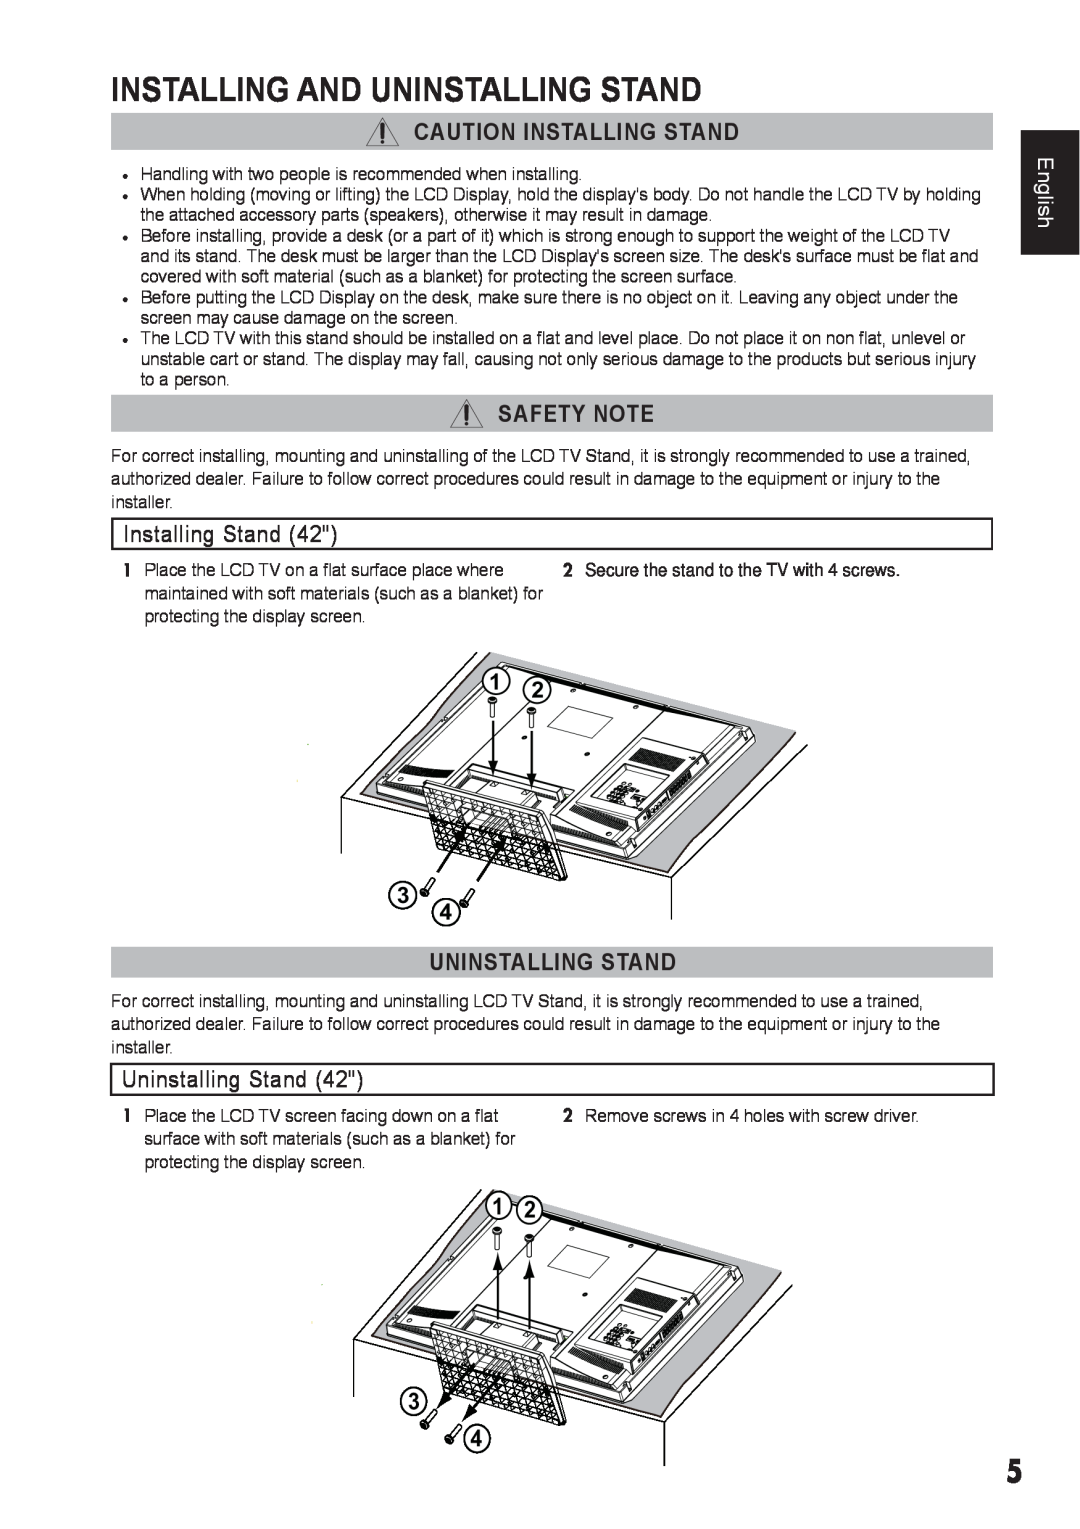 Sanyo DP42410 manual Installing And Uninstalling Stand, Caution Installing Stand, Safety Note, English 